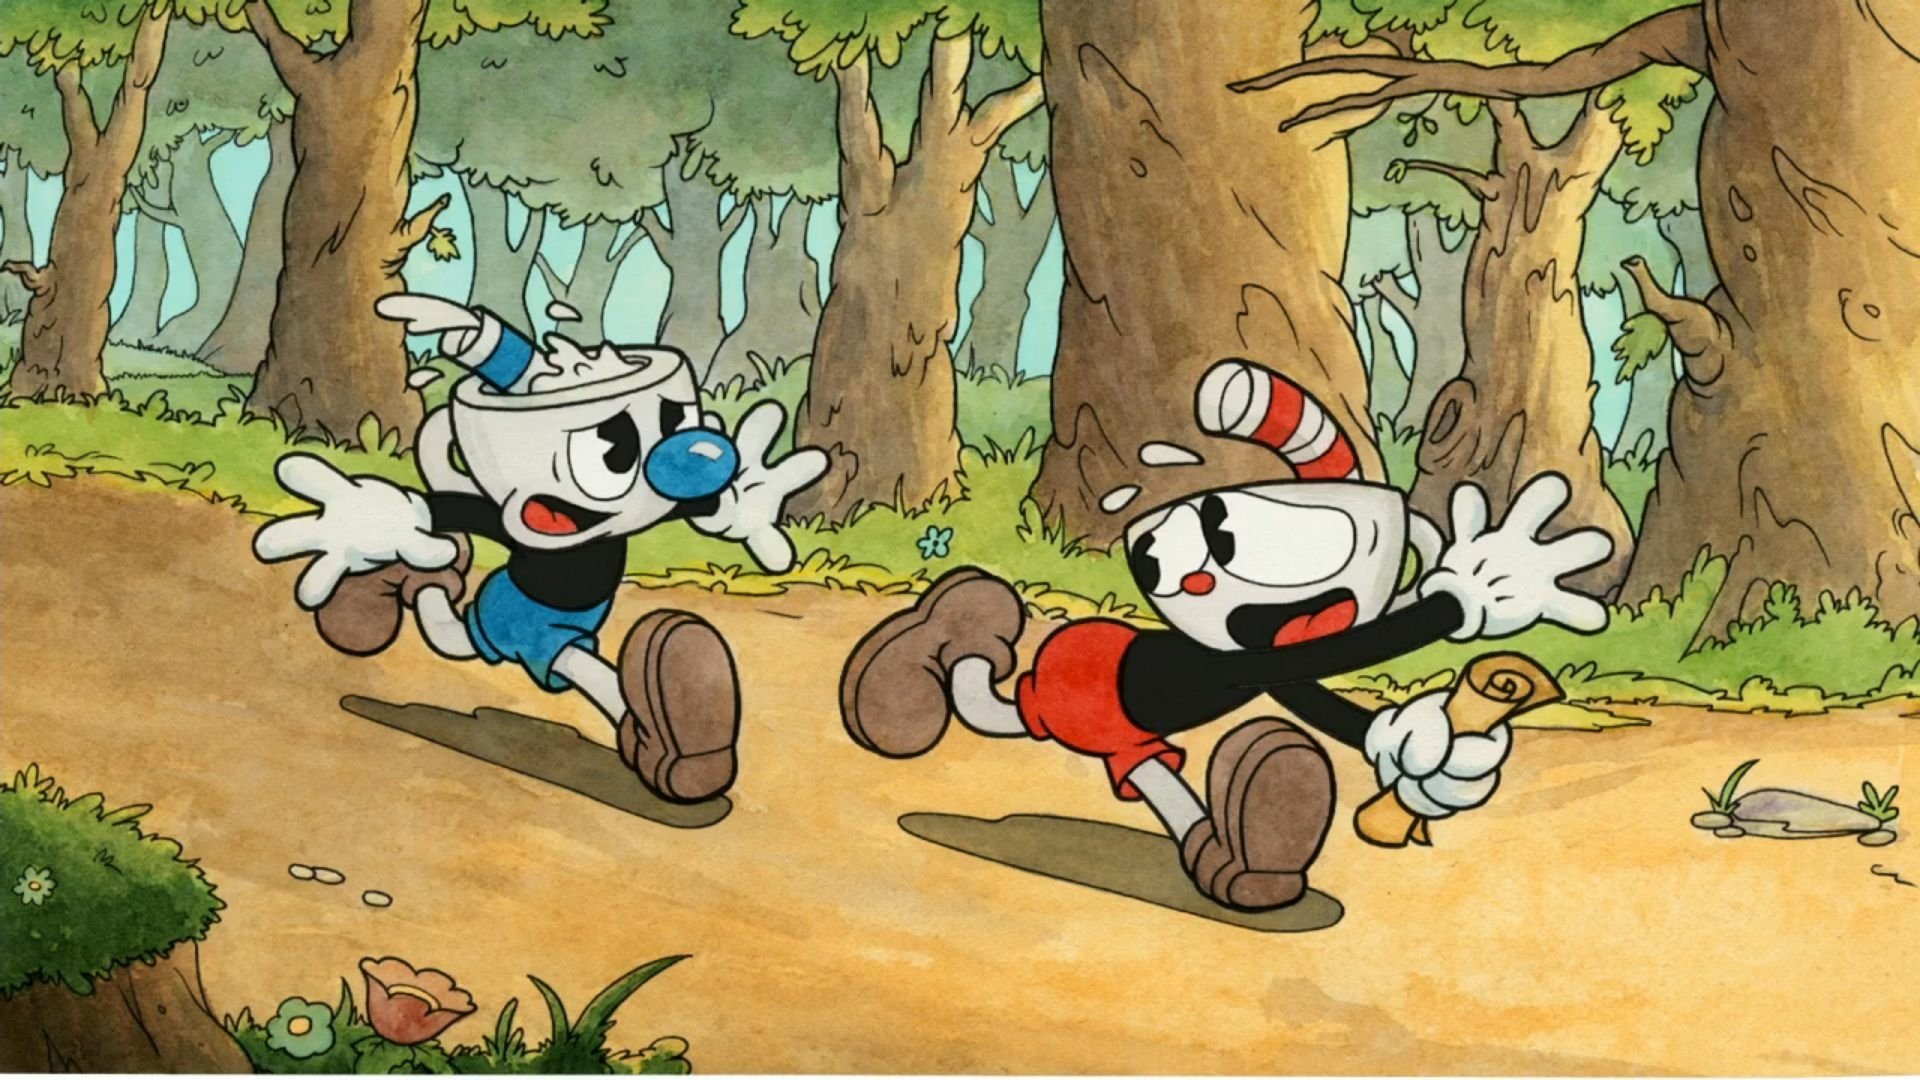 HD wallpaper featuring Cuphead and Mugman characters running through a forest background.